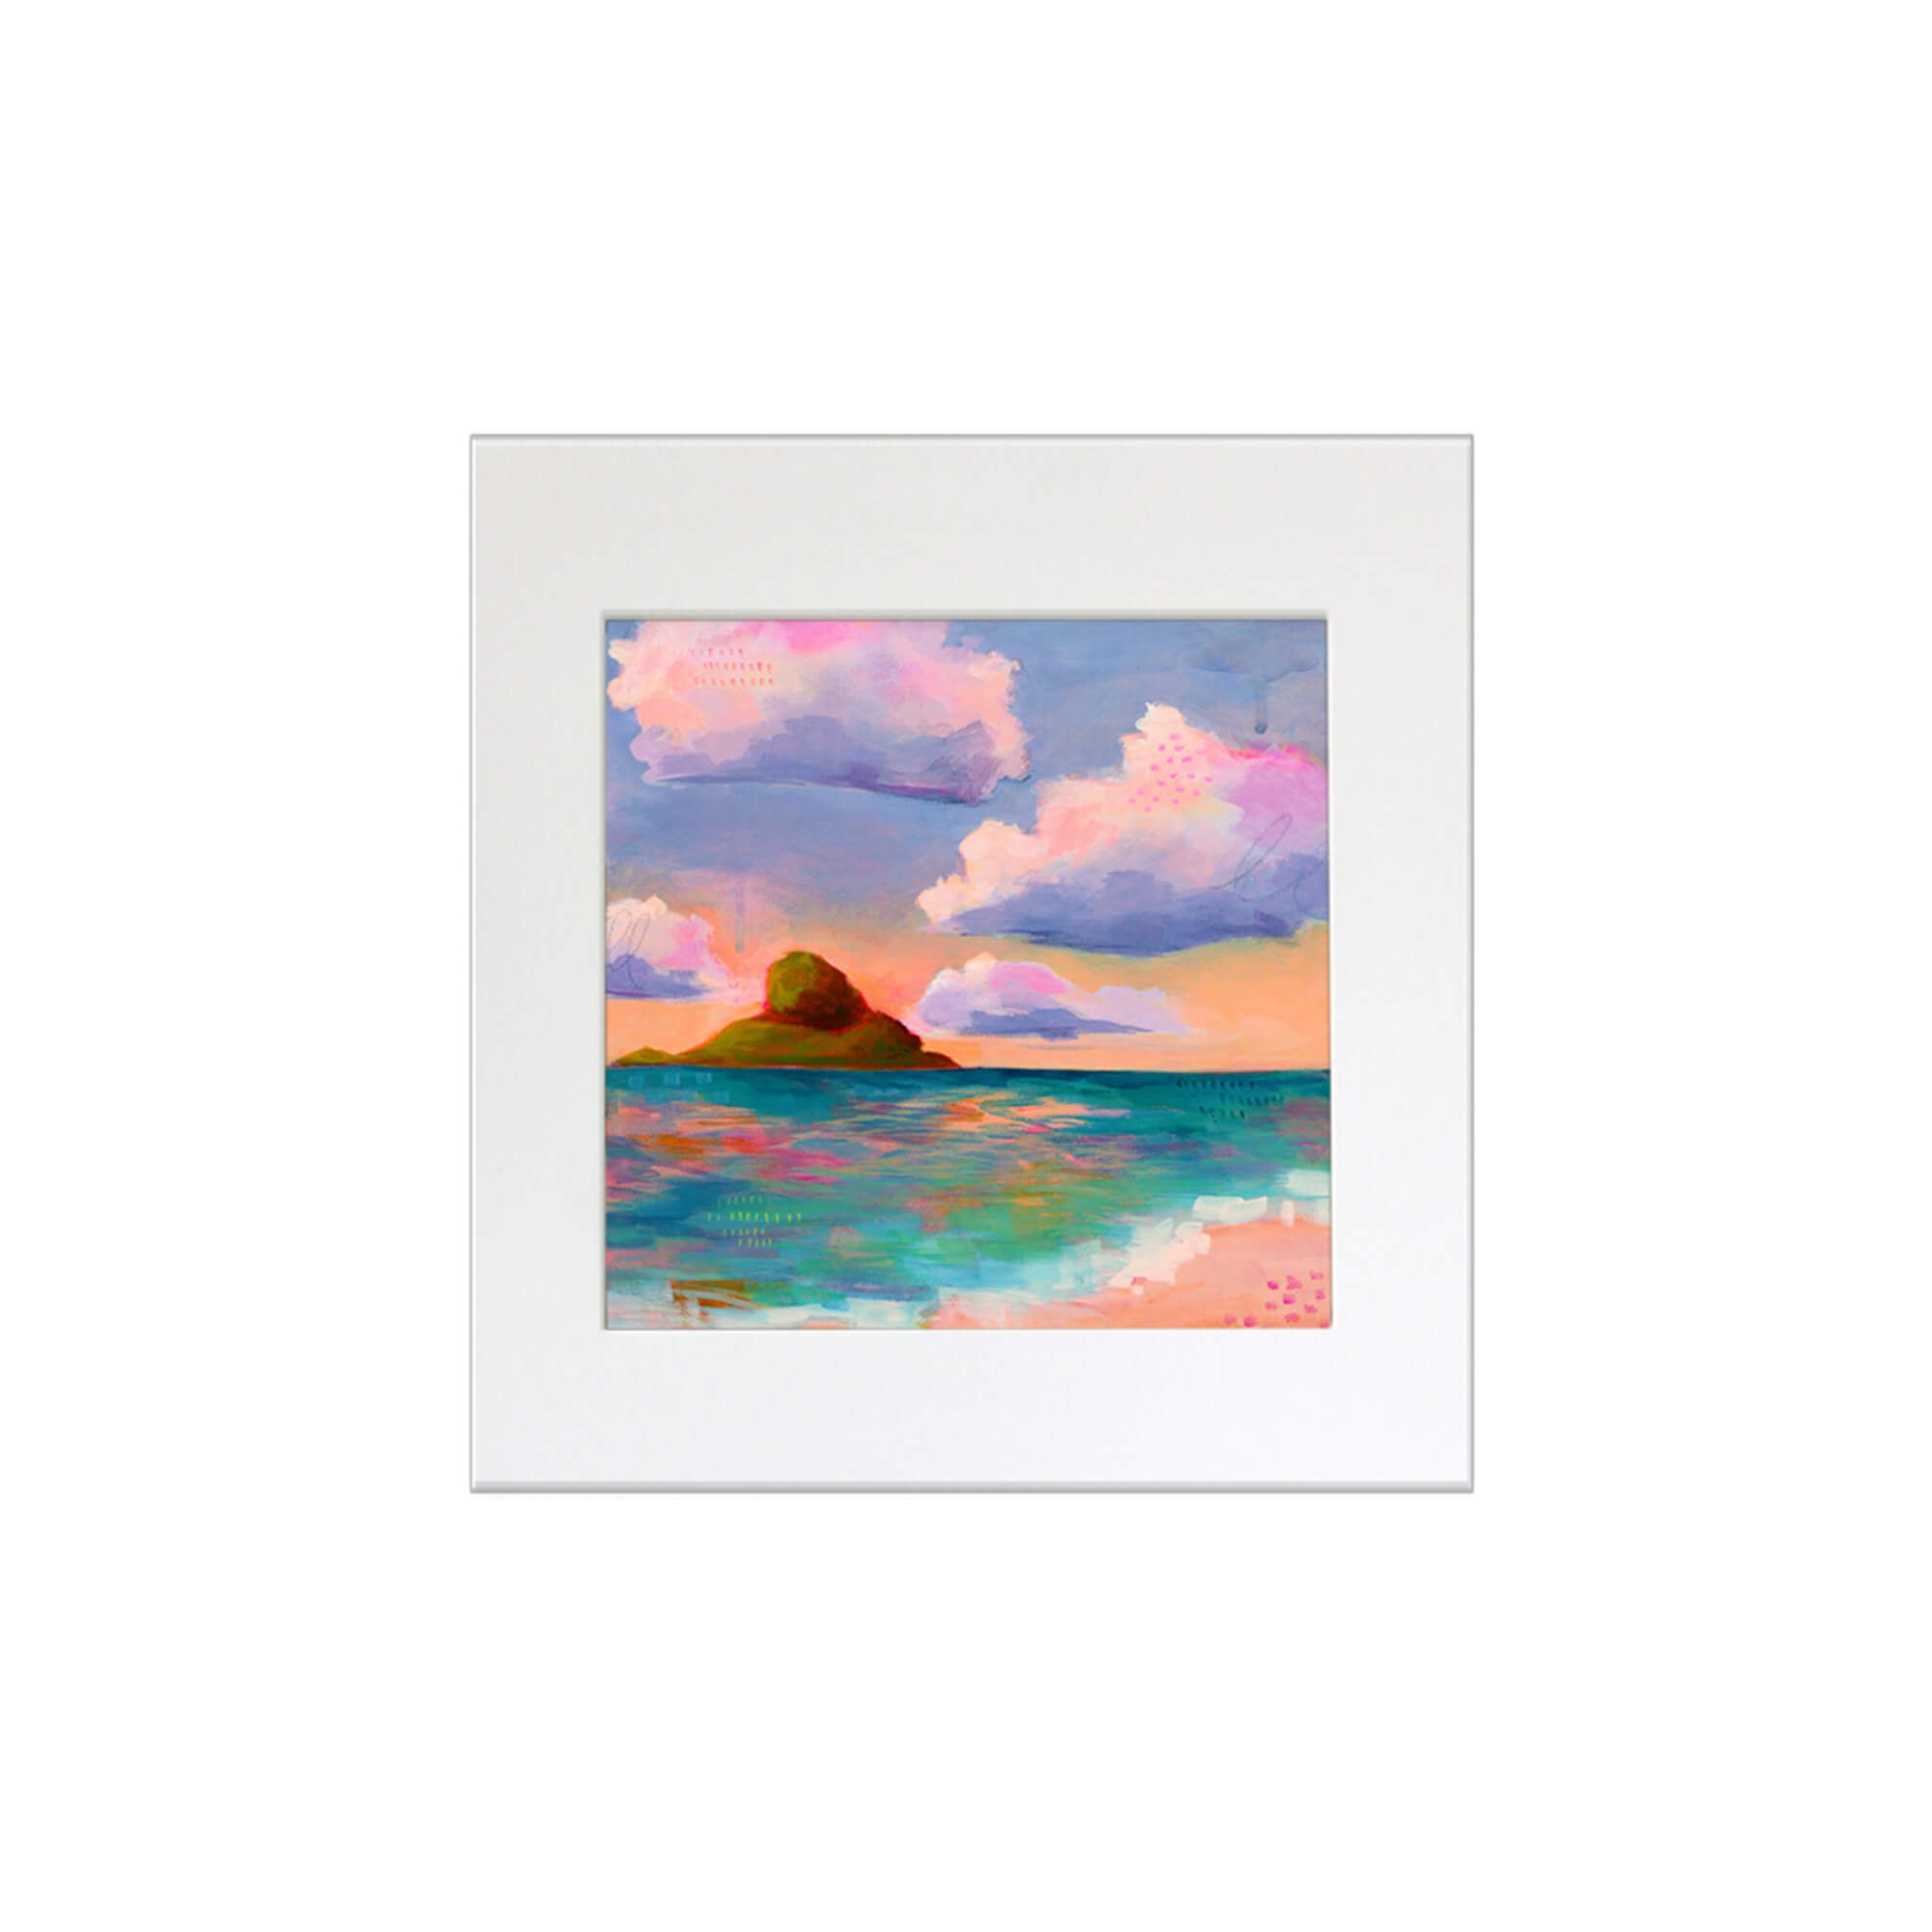 A seascape and horizon with vibrant orange and teal colors by Hawaii artist Lindsay Wilkins